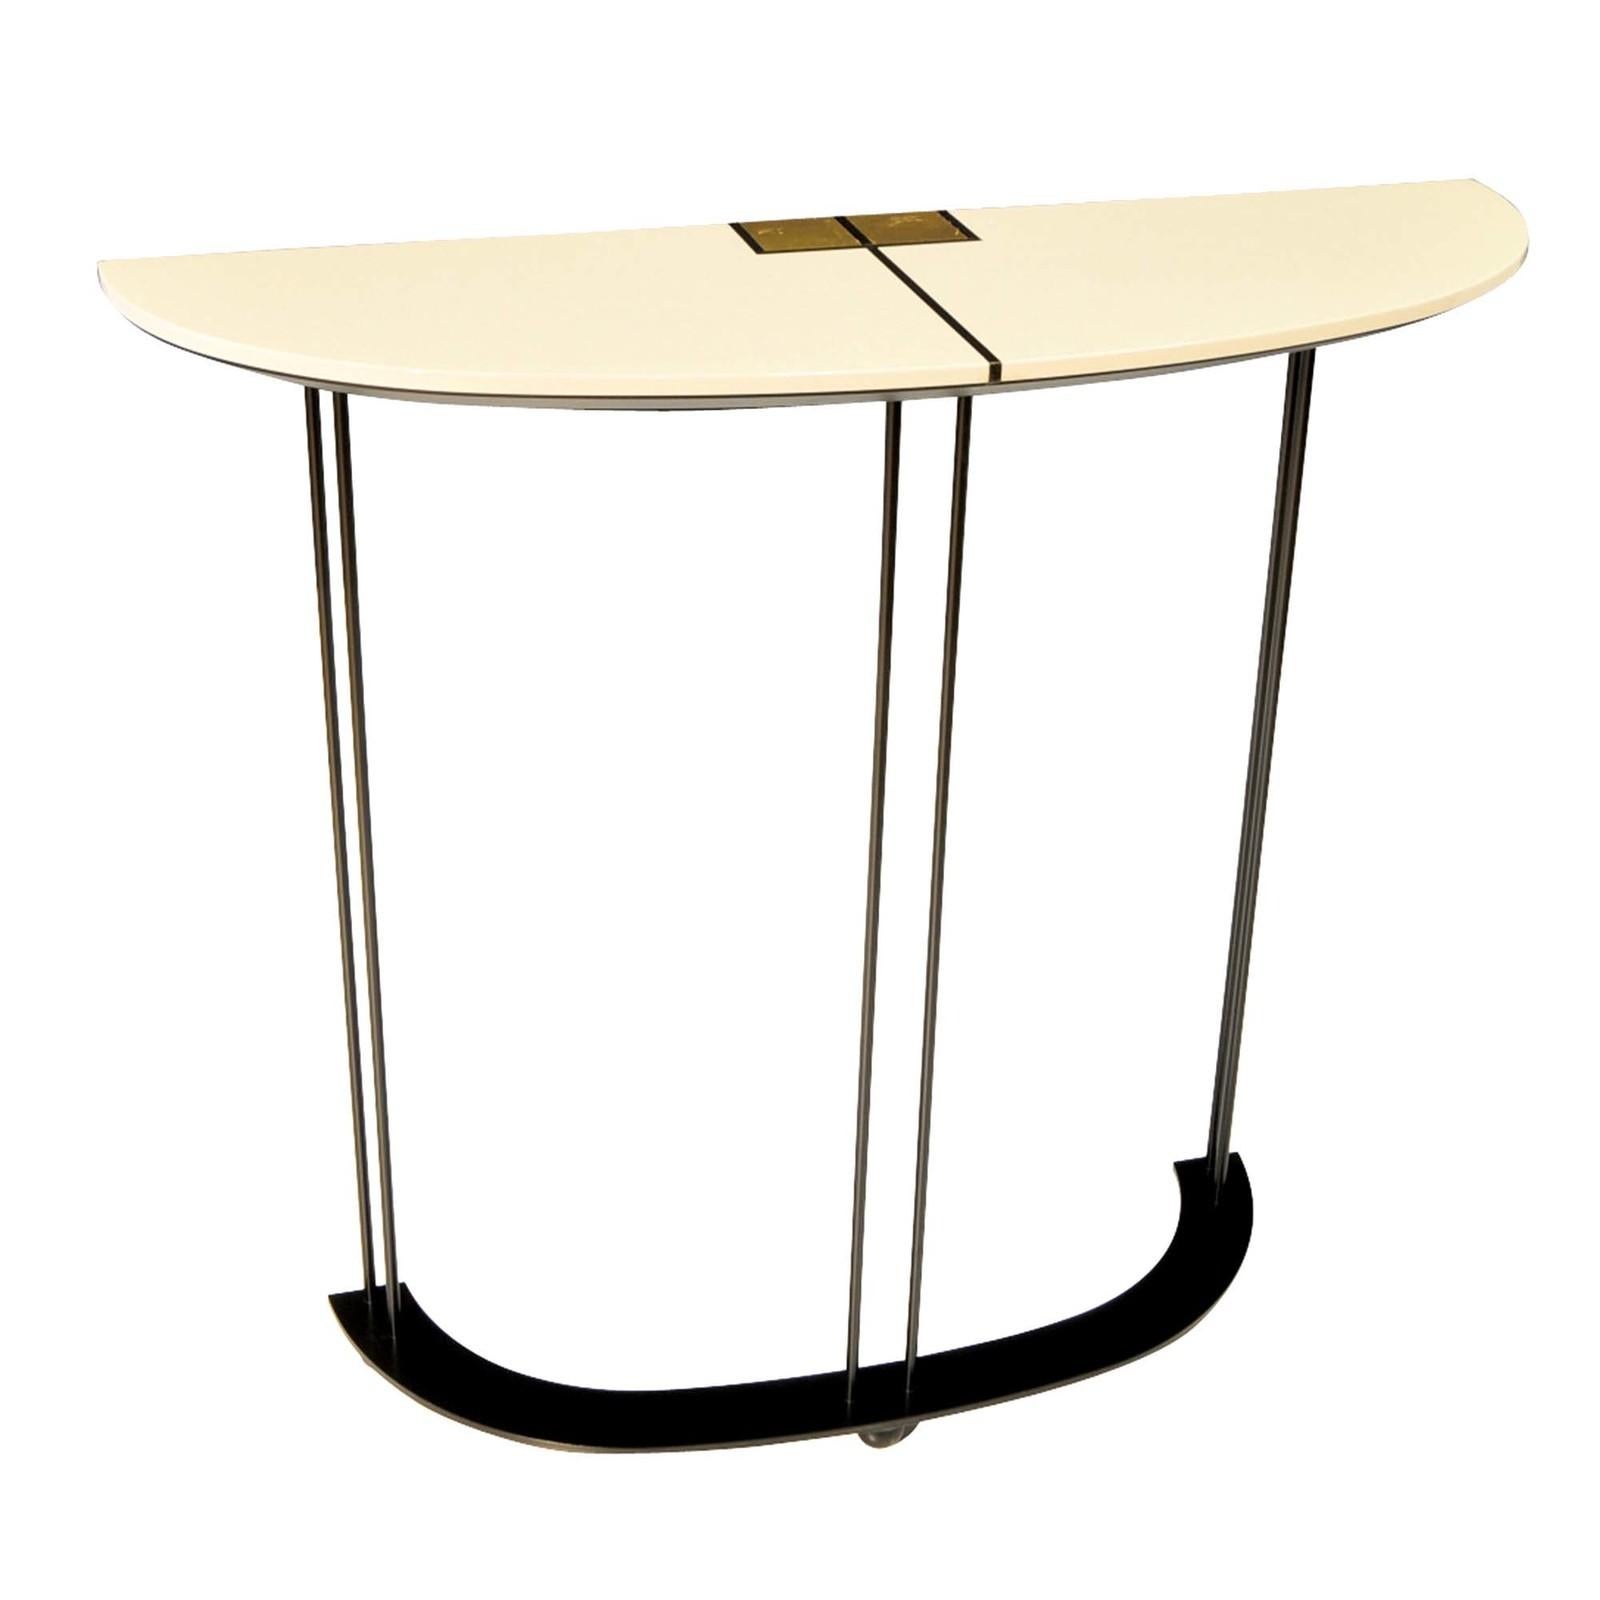 This tall console boasts a demilune profile, the wooden top finished in an off-white shiny polyurethane lacquer, which contrasts with the three open, column-like legs in a matte black powder coating. The table features a delicate cross inlay accent